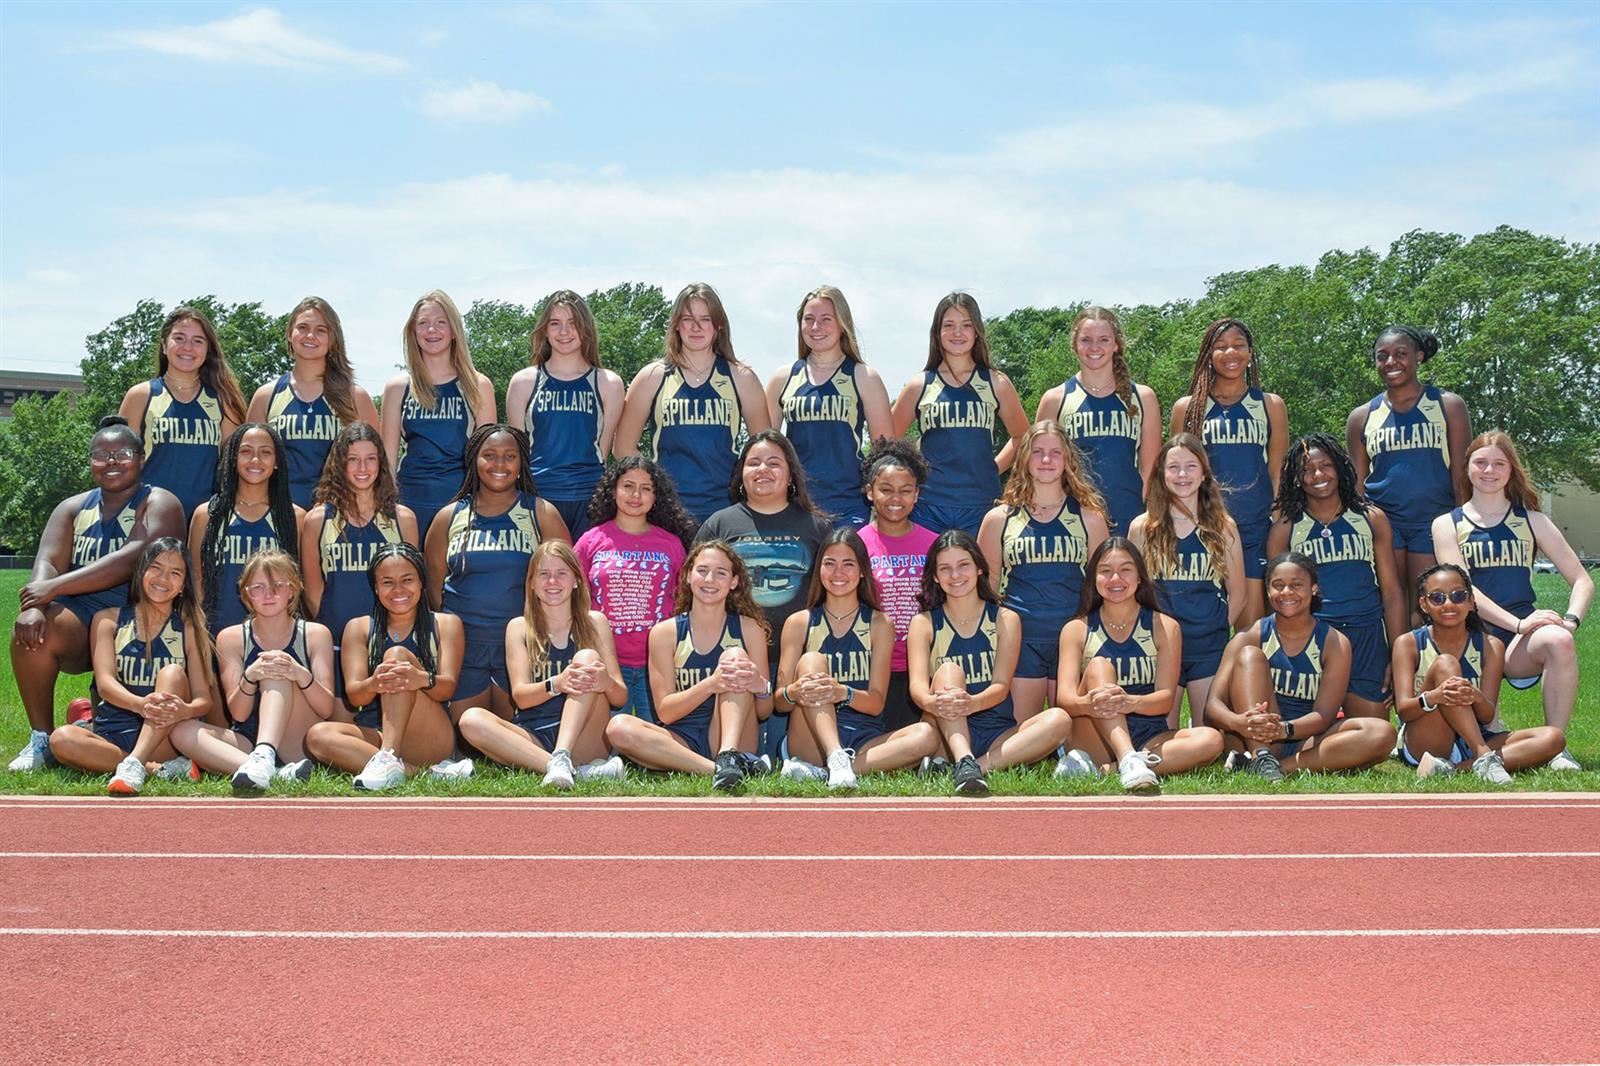 Spillane Middle School tied for the eighth grade girls’ track and field team title.